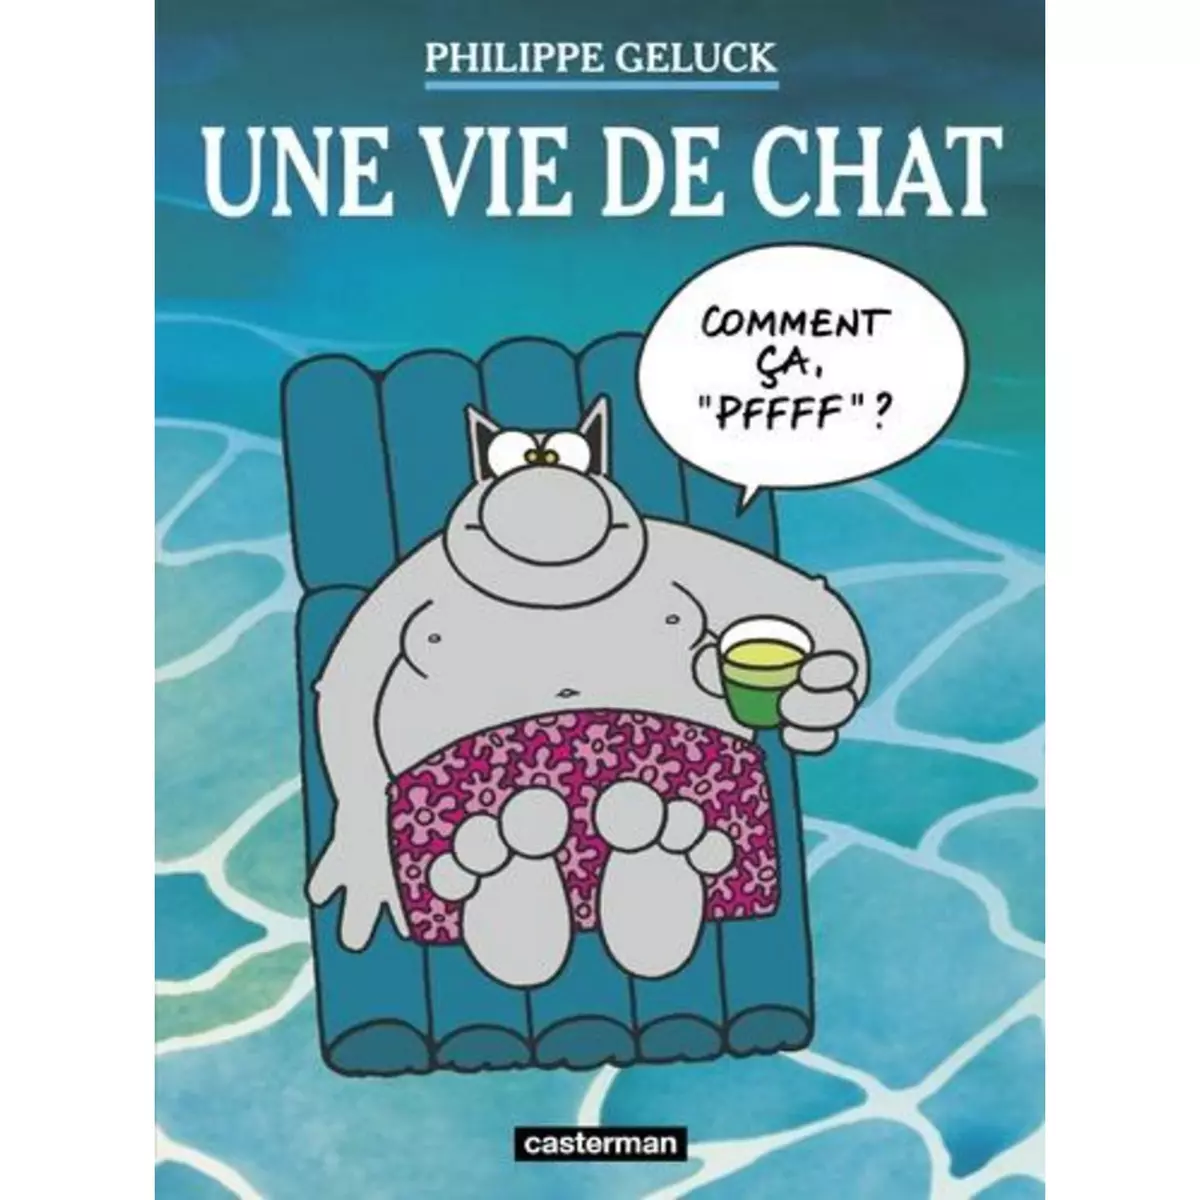  LE CHAT TOME 15 : UNE VIE DE CHAT, Geluck Philippe